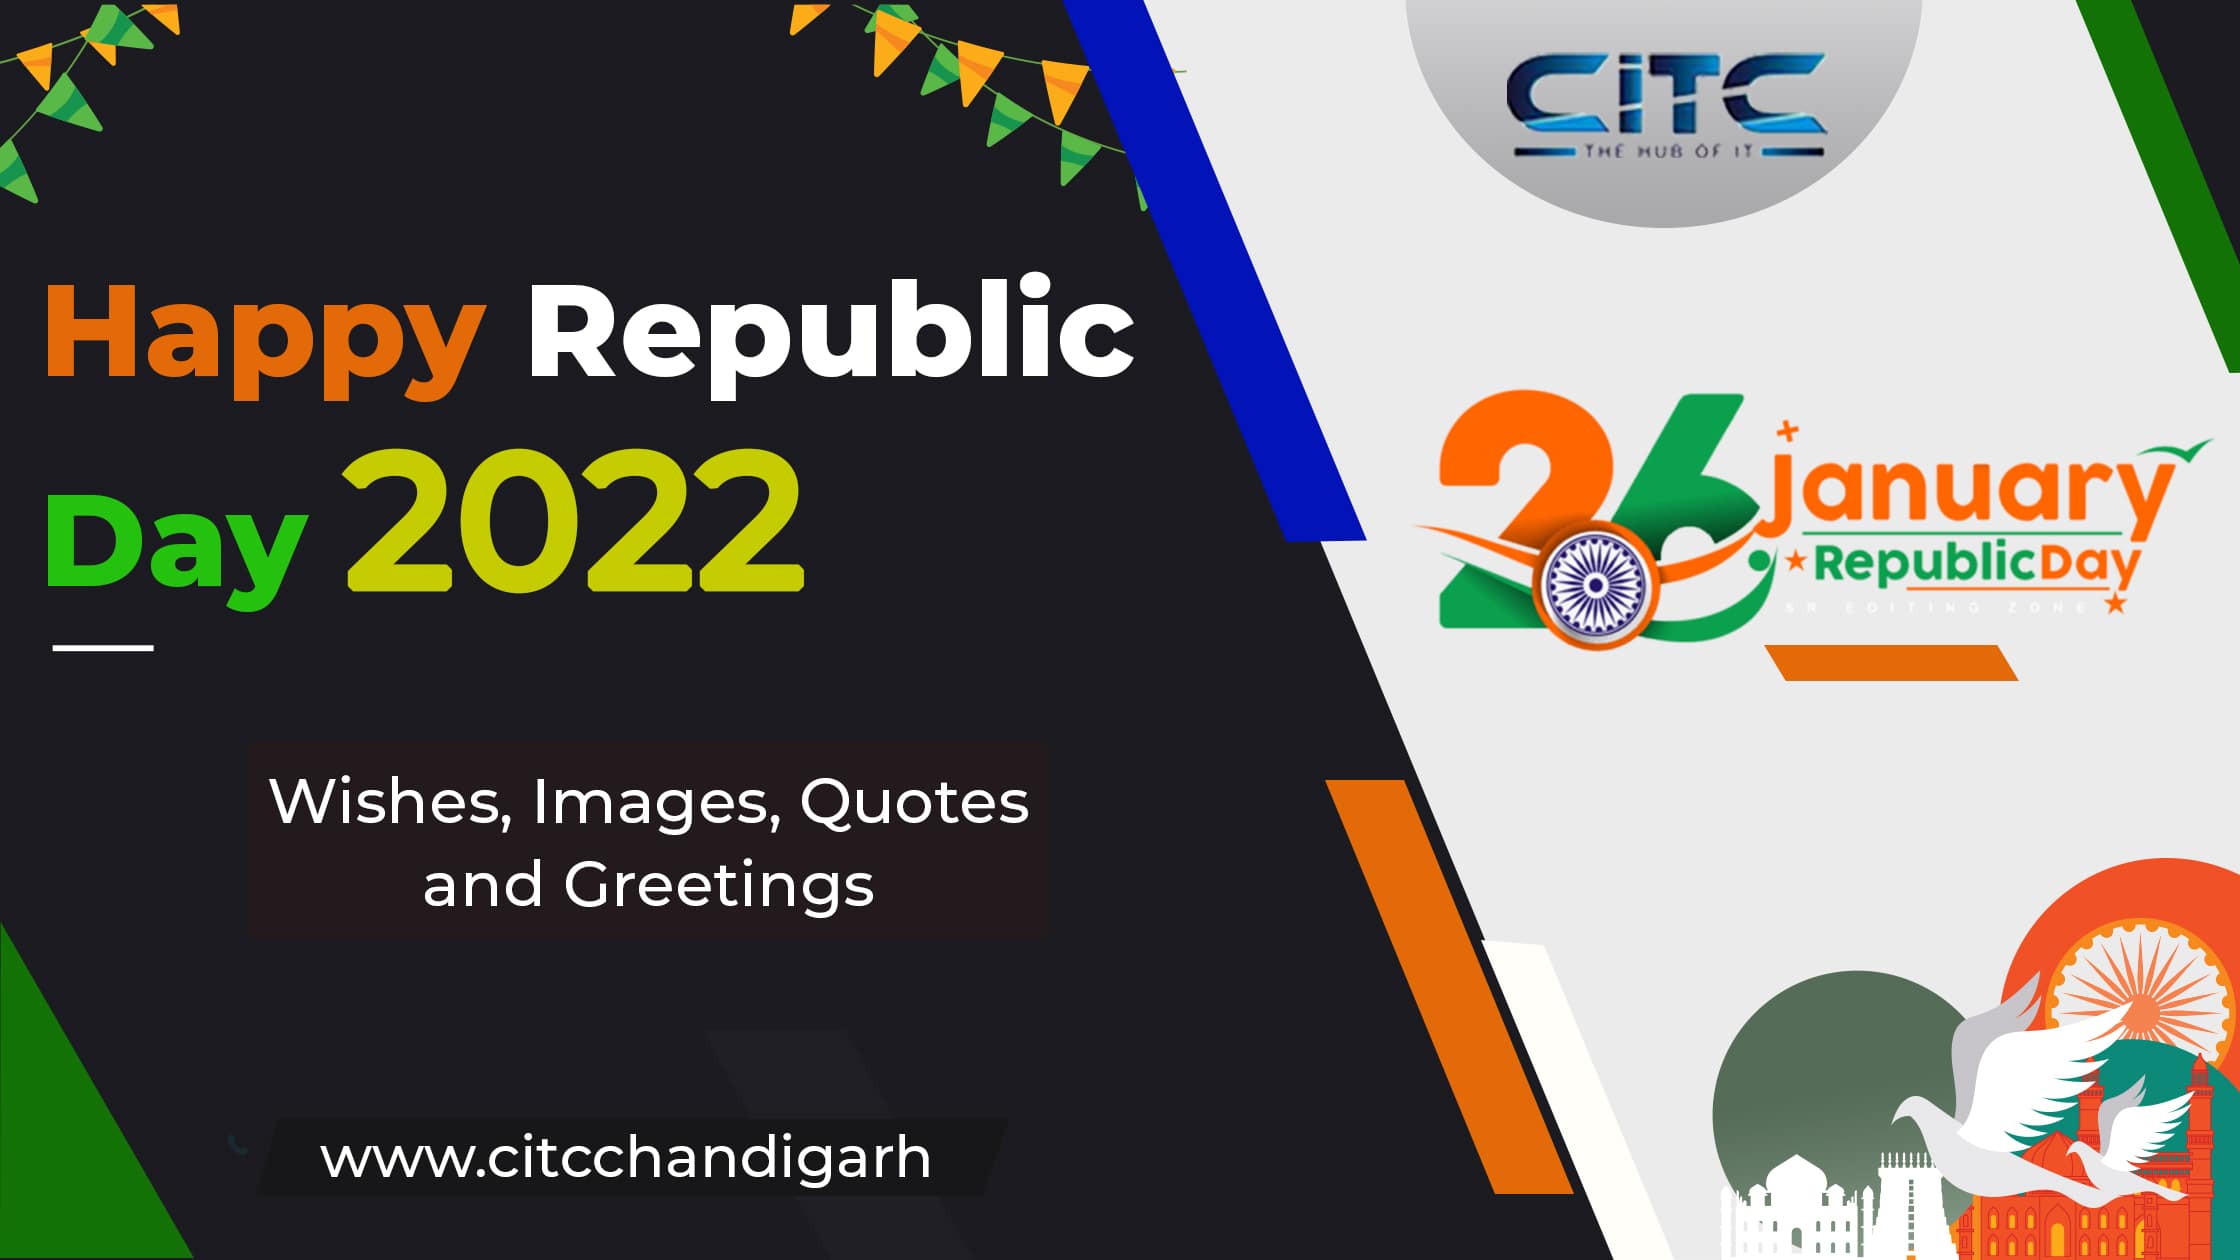 Happy Republic Day 2022 Images, Wishes, Quotes, Messages and WhatsApp Status